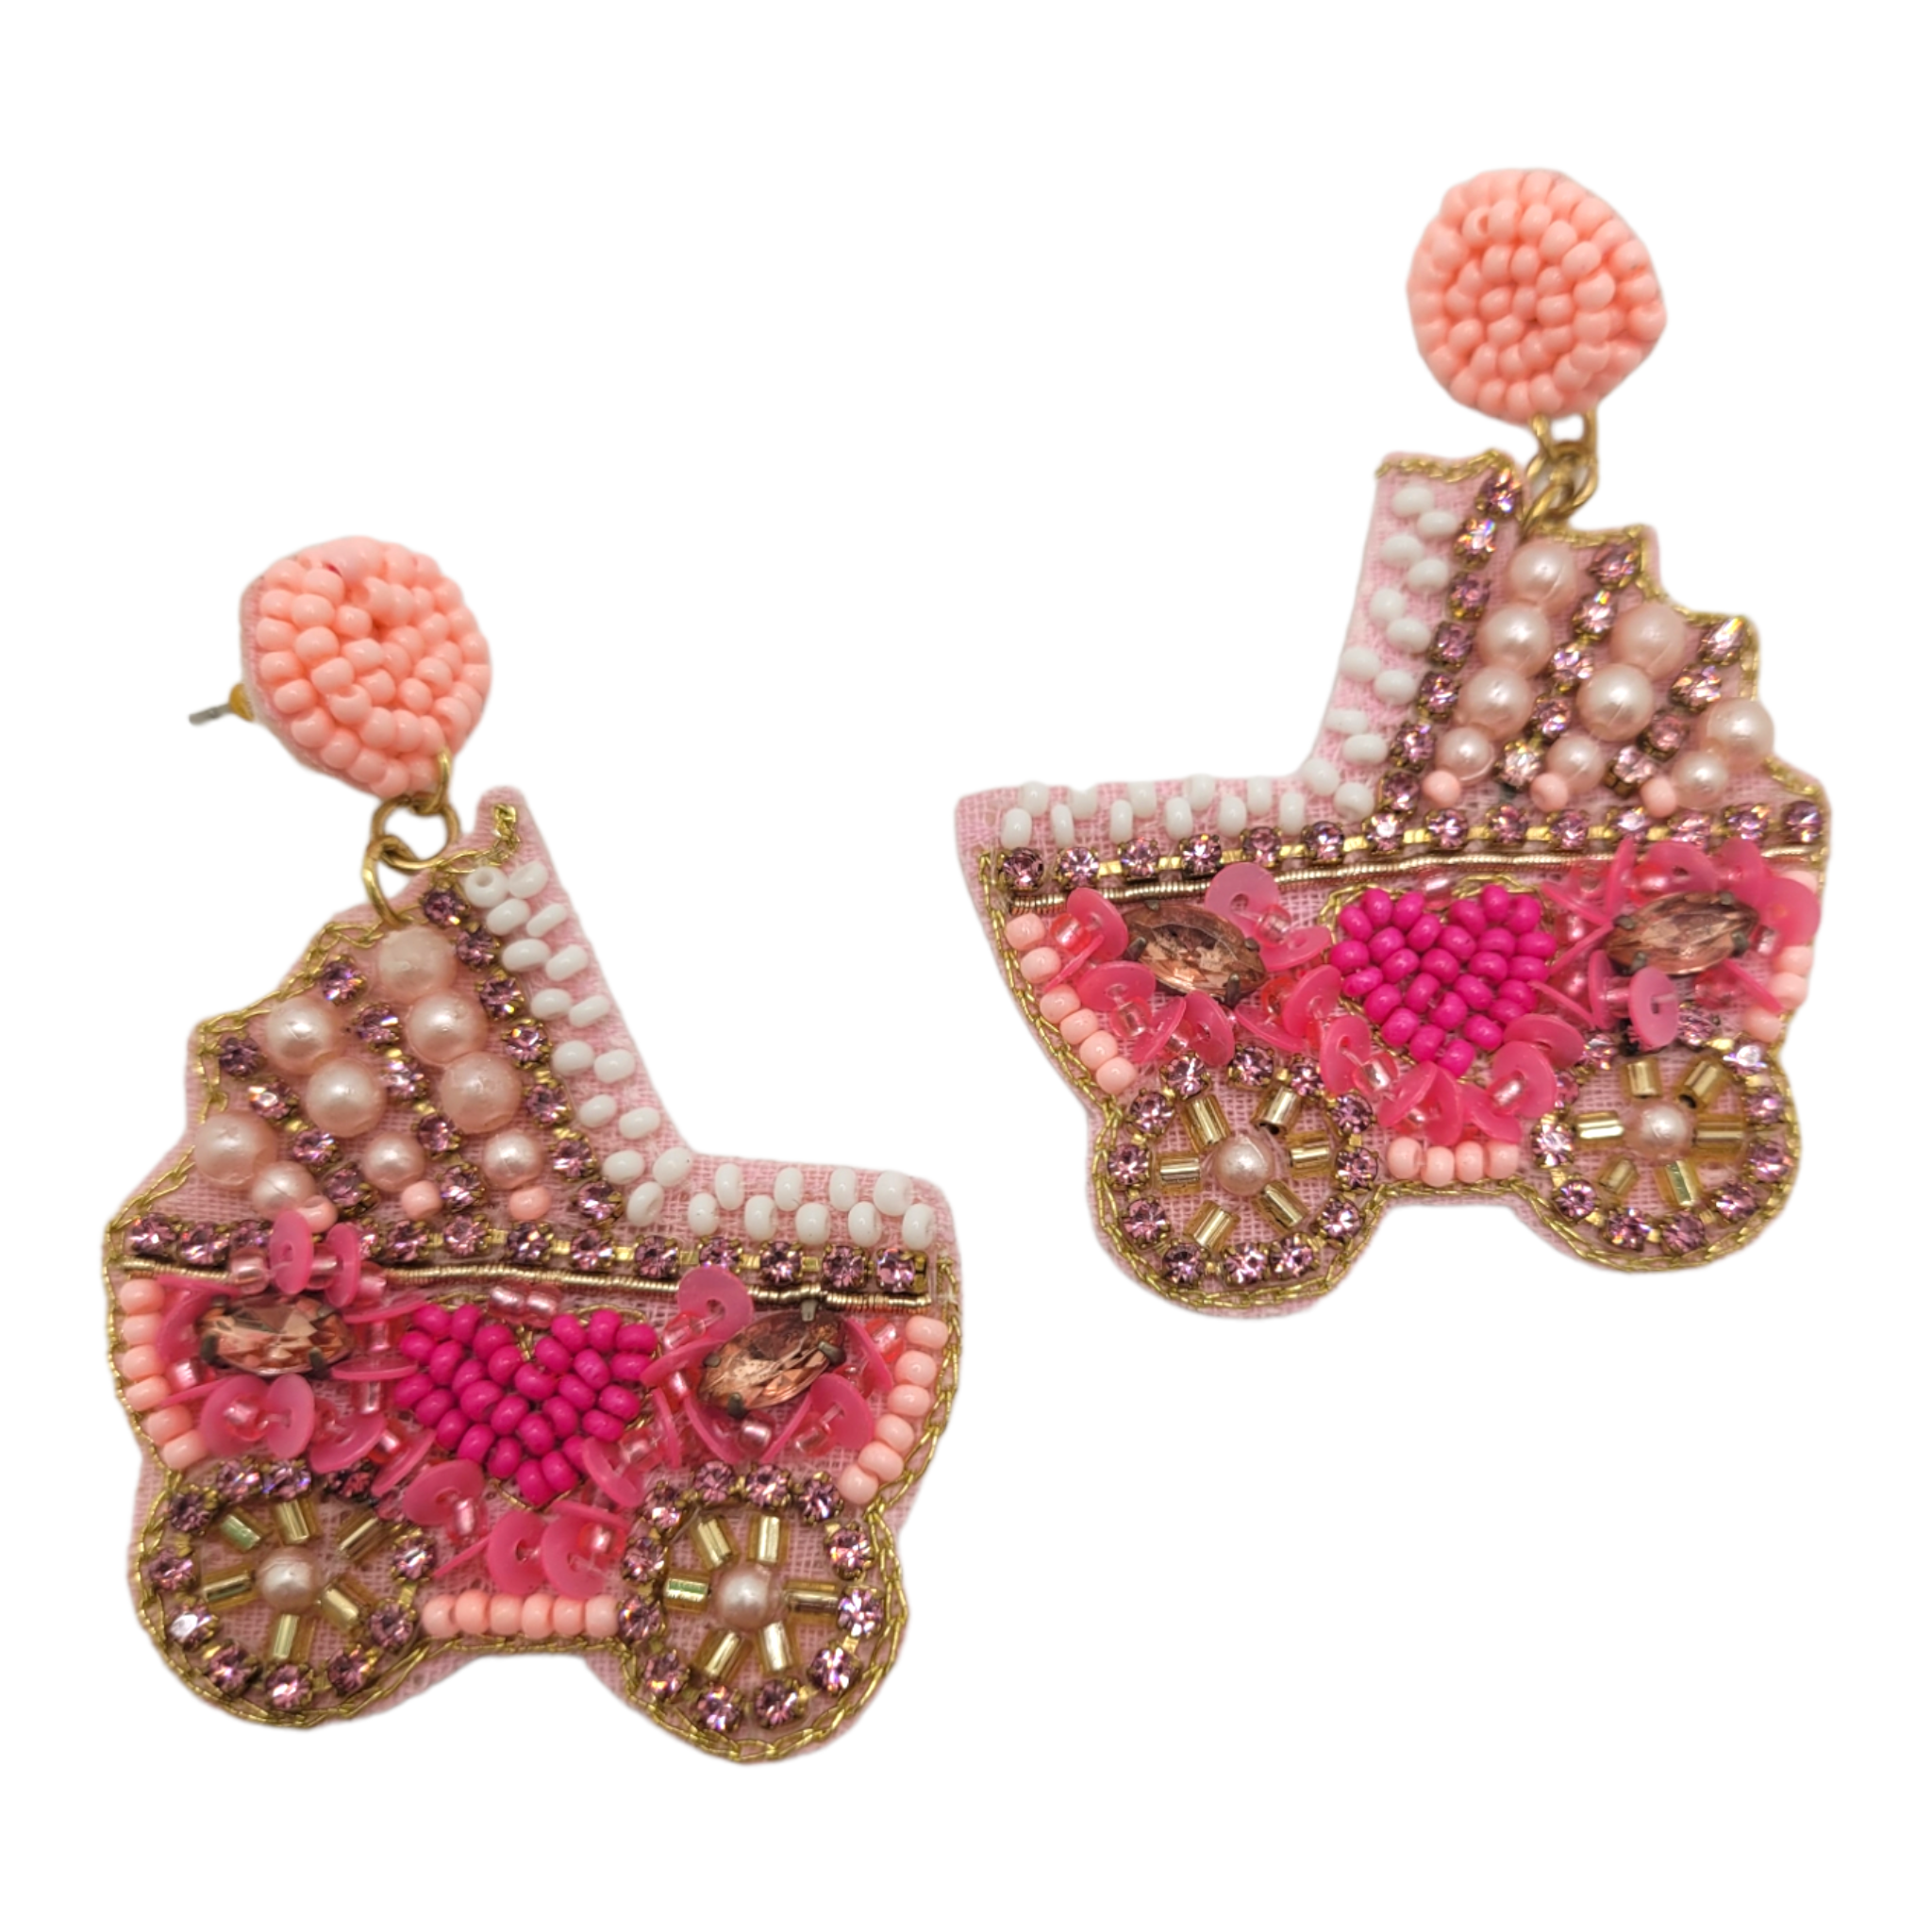 Pink Baby Carriage Earrings-Earrings-louisgeorgeboutique-LouisGeorge Boutique, Women’s Fashion Boutique Located in Trussville, Alabama